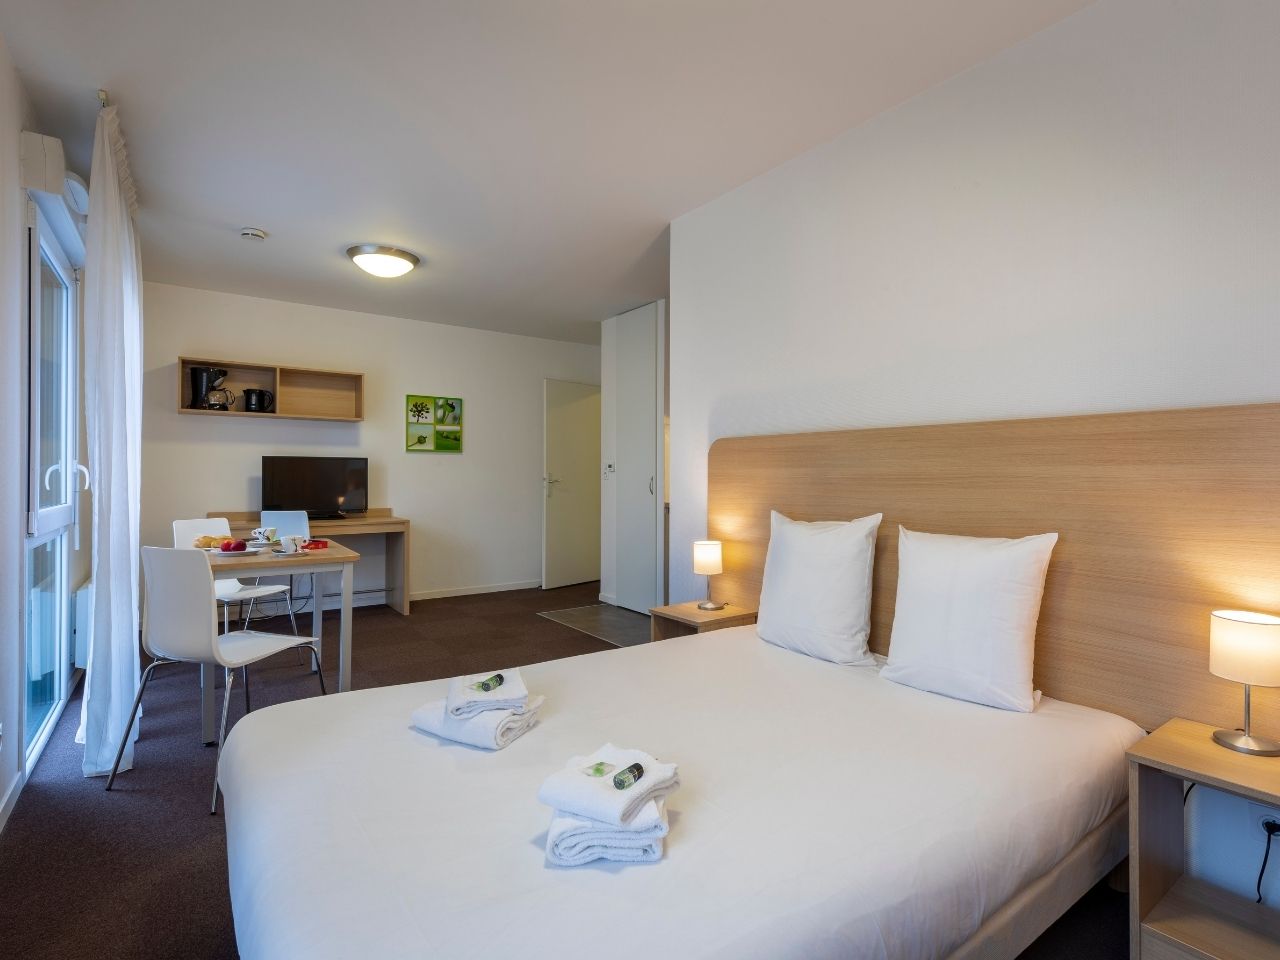 Kosy Appart Hotêl - Troyes City & Park ★★ - chambre-city-and-park-troyes